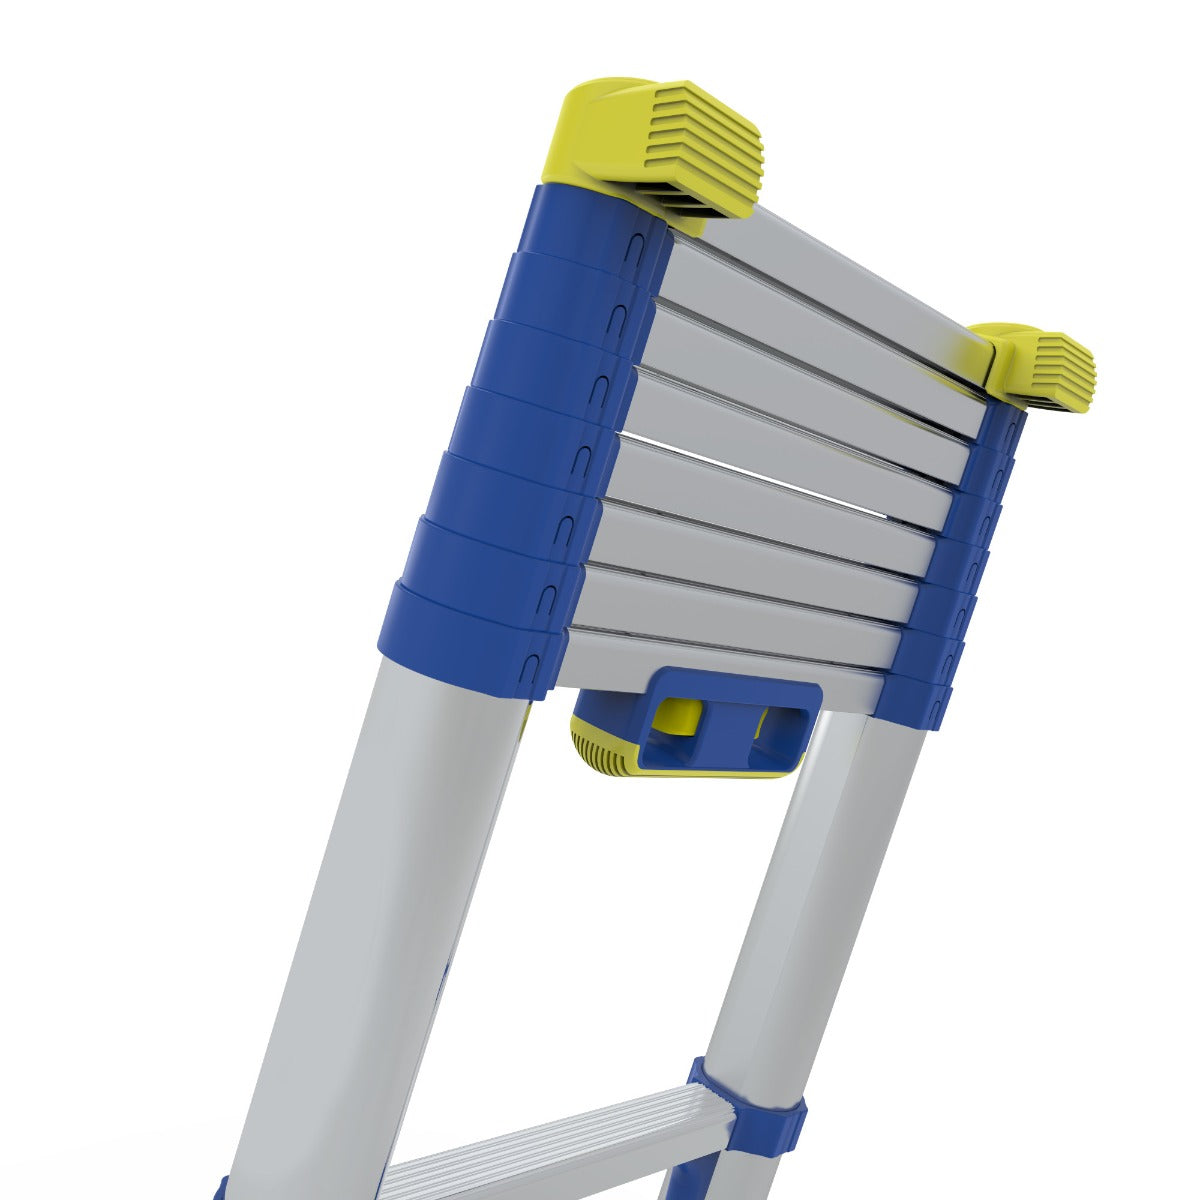 Werner Soft Close Telescopic Ladder - 2.6 m - Wall bumpers